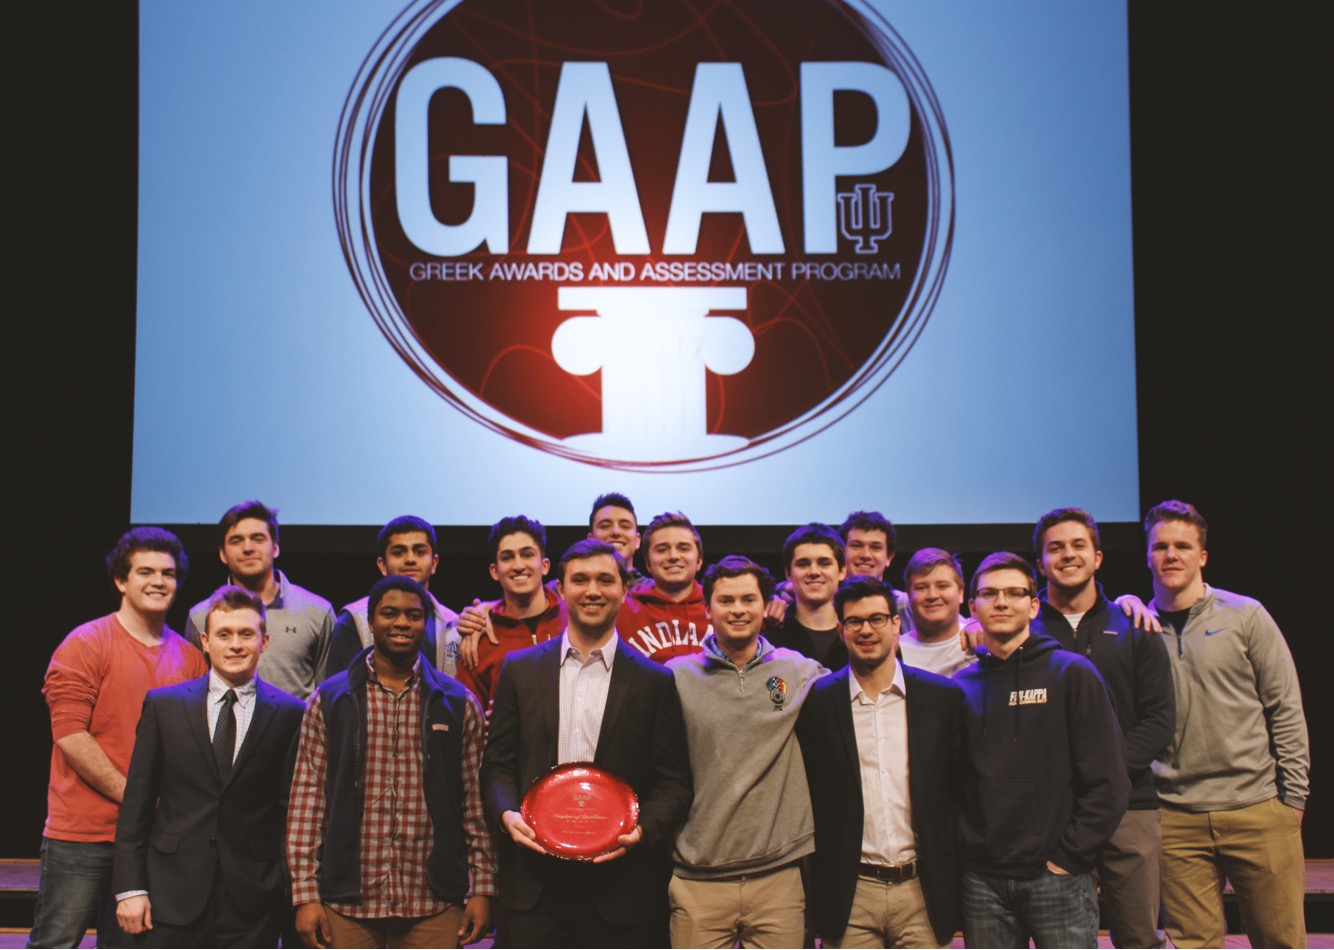  Phi Gamma Delta won “Most Outstanding Chapter” out of all IFC Fraternities at the GAAP awards. Fiji was the only house awarded this honor.